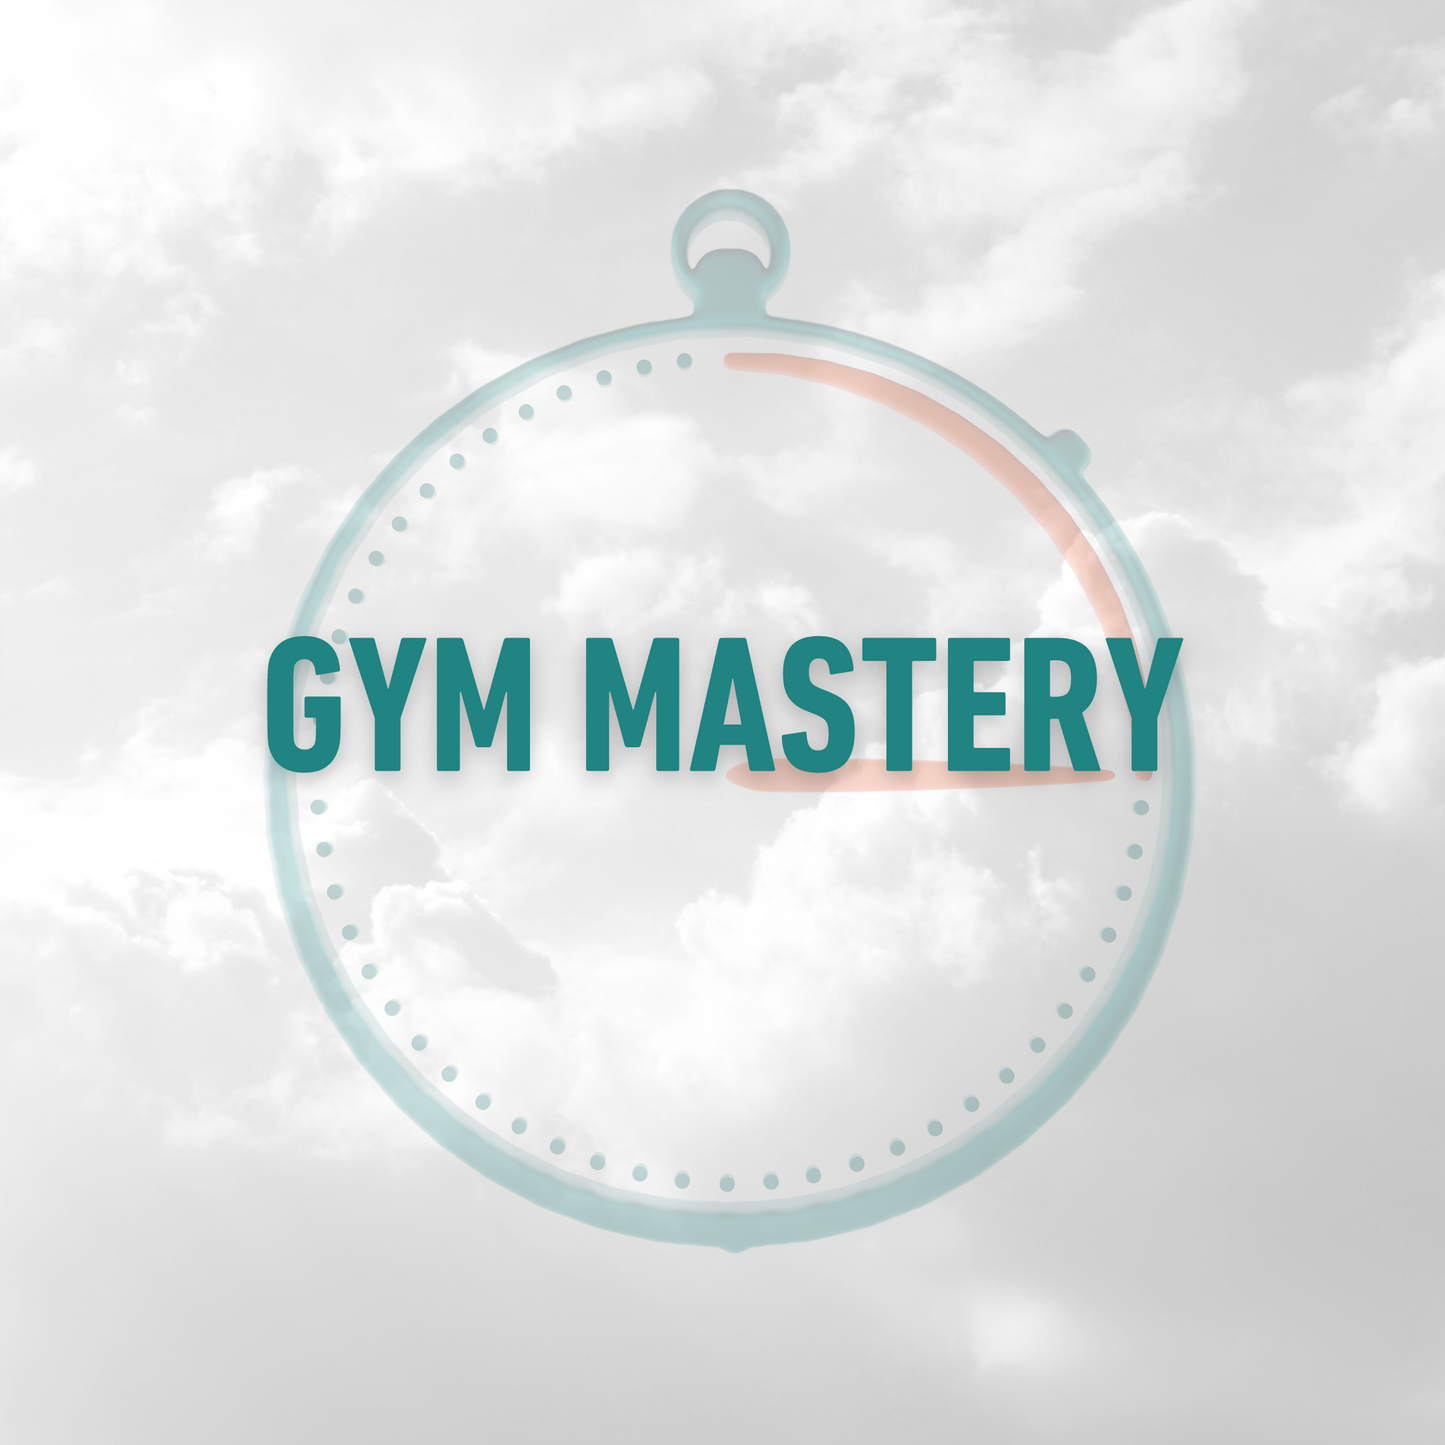 6in15 - Gym Mastery